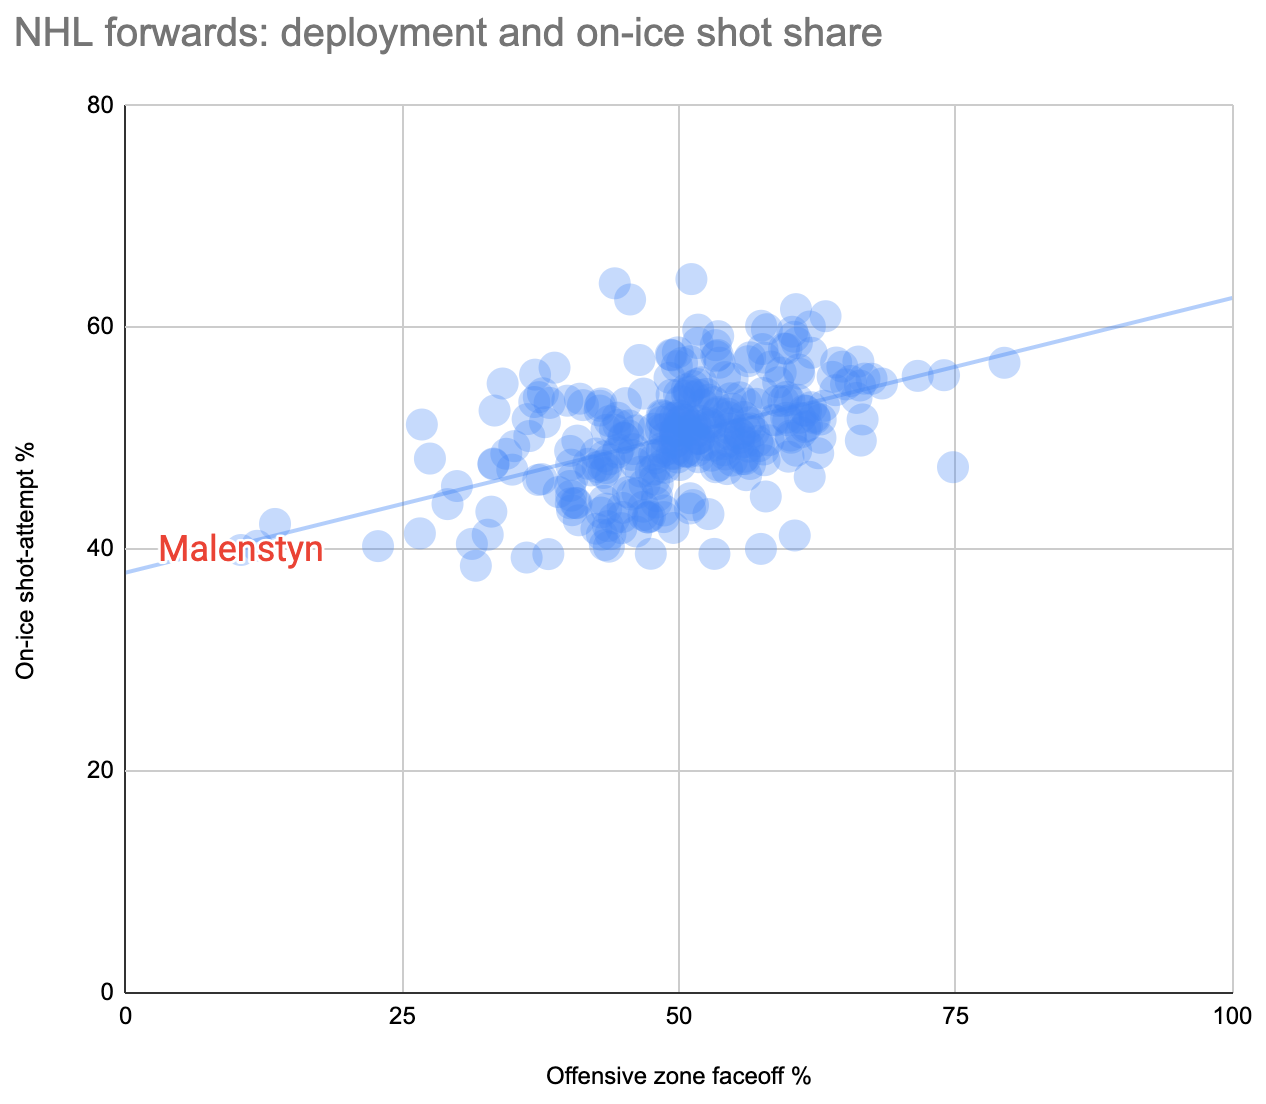 Beck Malenstyn deployments and on-ice sh%